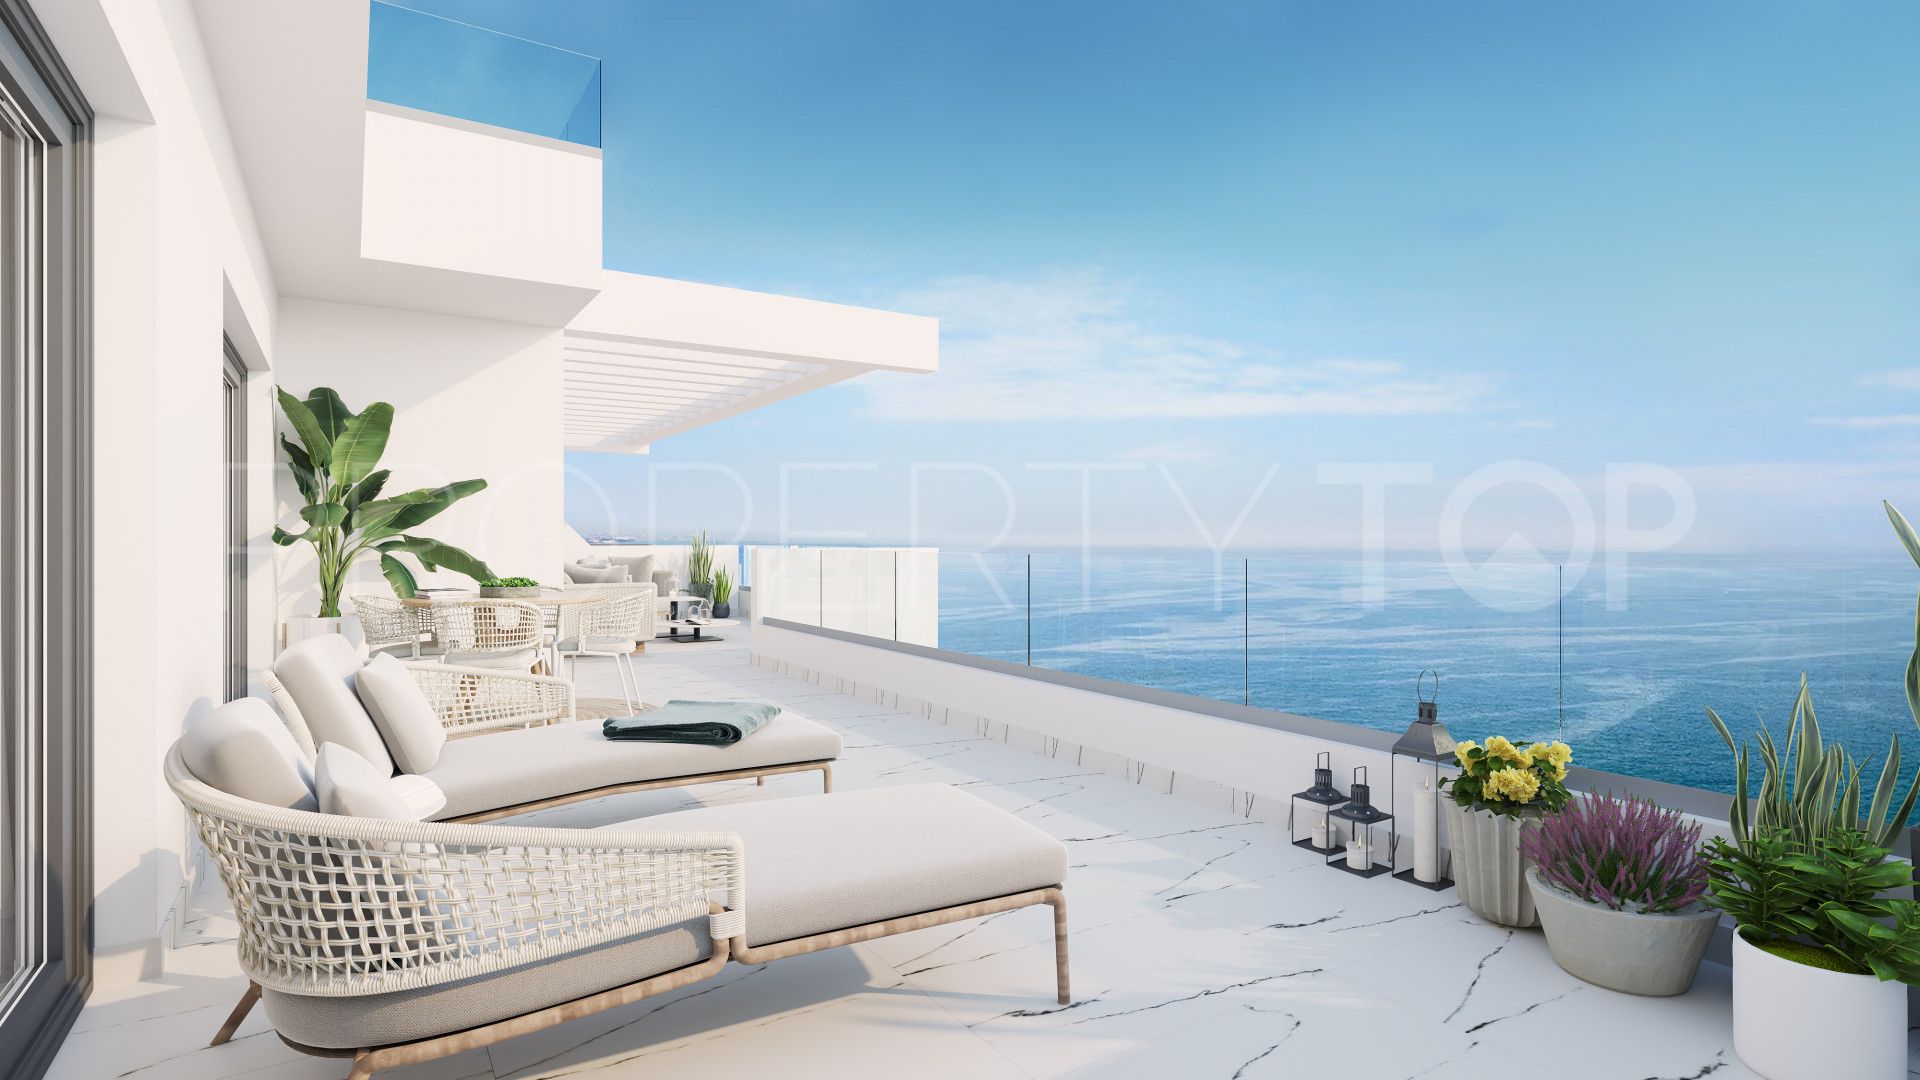 Camarate Golf 2 bedrooms penthouse for sale